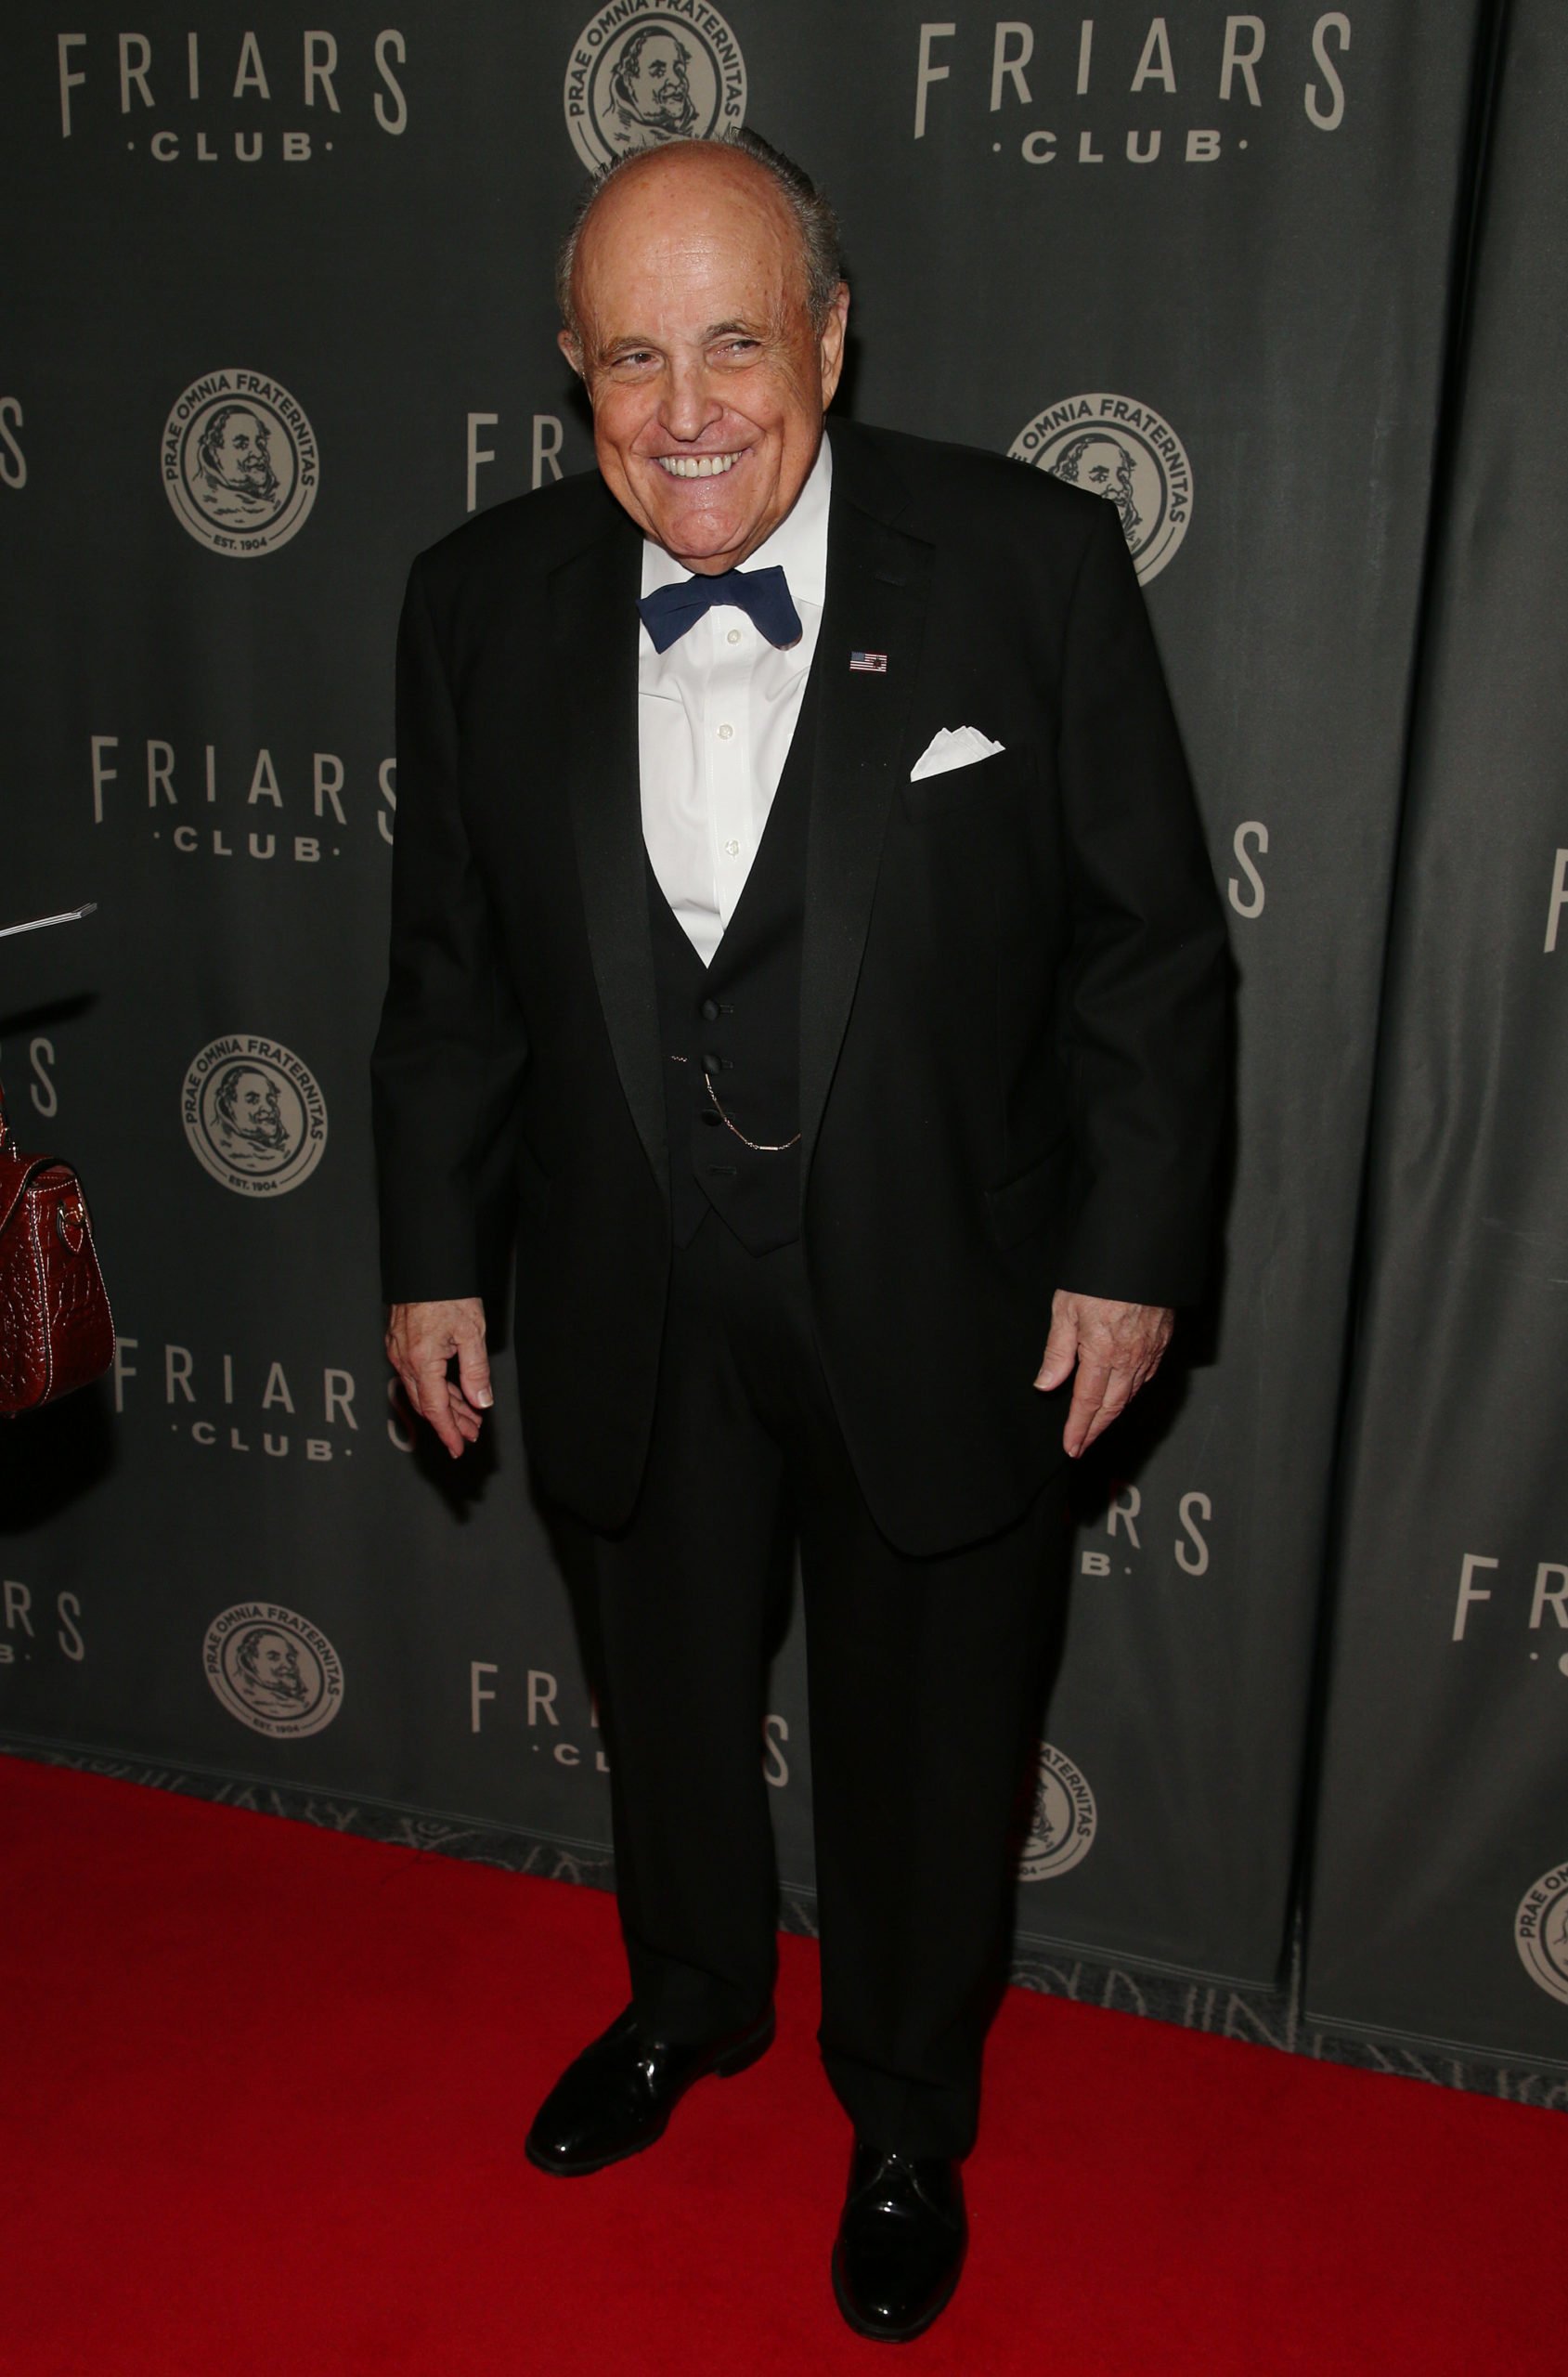 NEW YORK, NEW YORK - MAY 26: Rudy Giuliani attends the Friars Club gala honoring Tracy Morgan with the Entertainment Icon Award at The Ziegfeld Ballroom on May 26, 2022 in New York City. (Photo by Rob Kim/Getty Images)